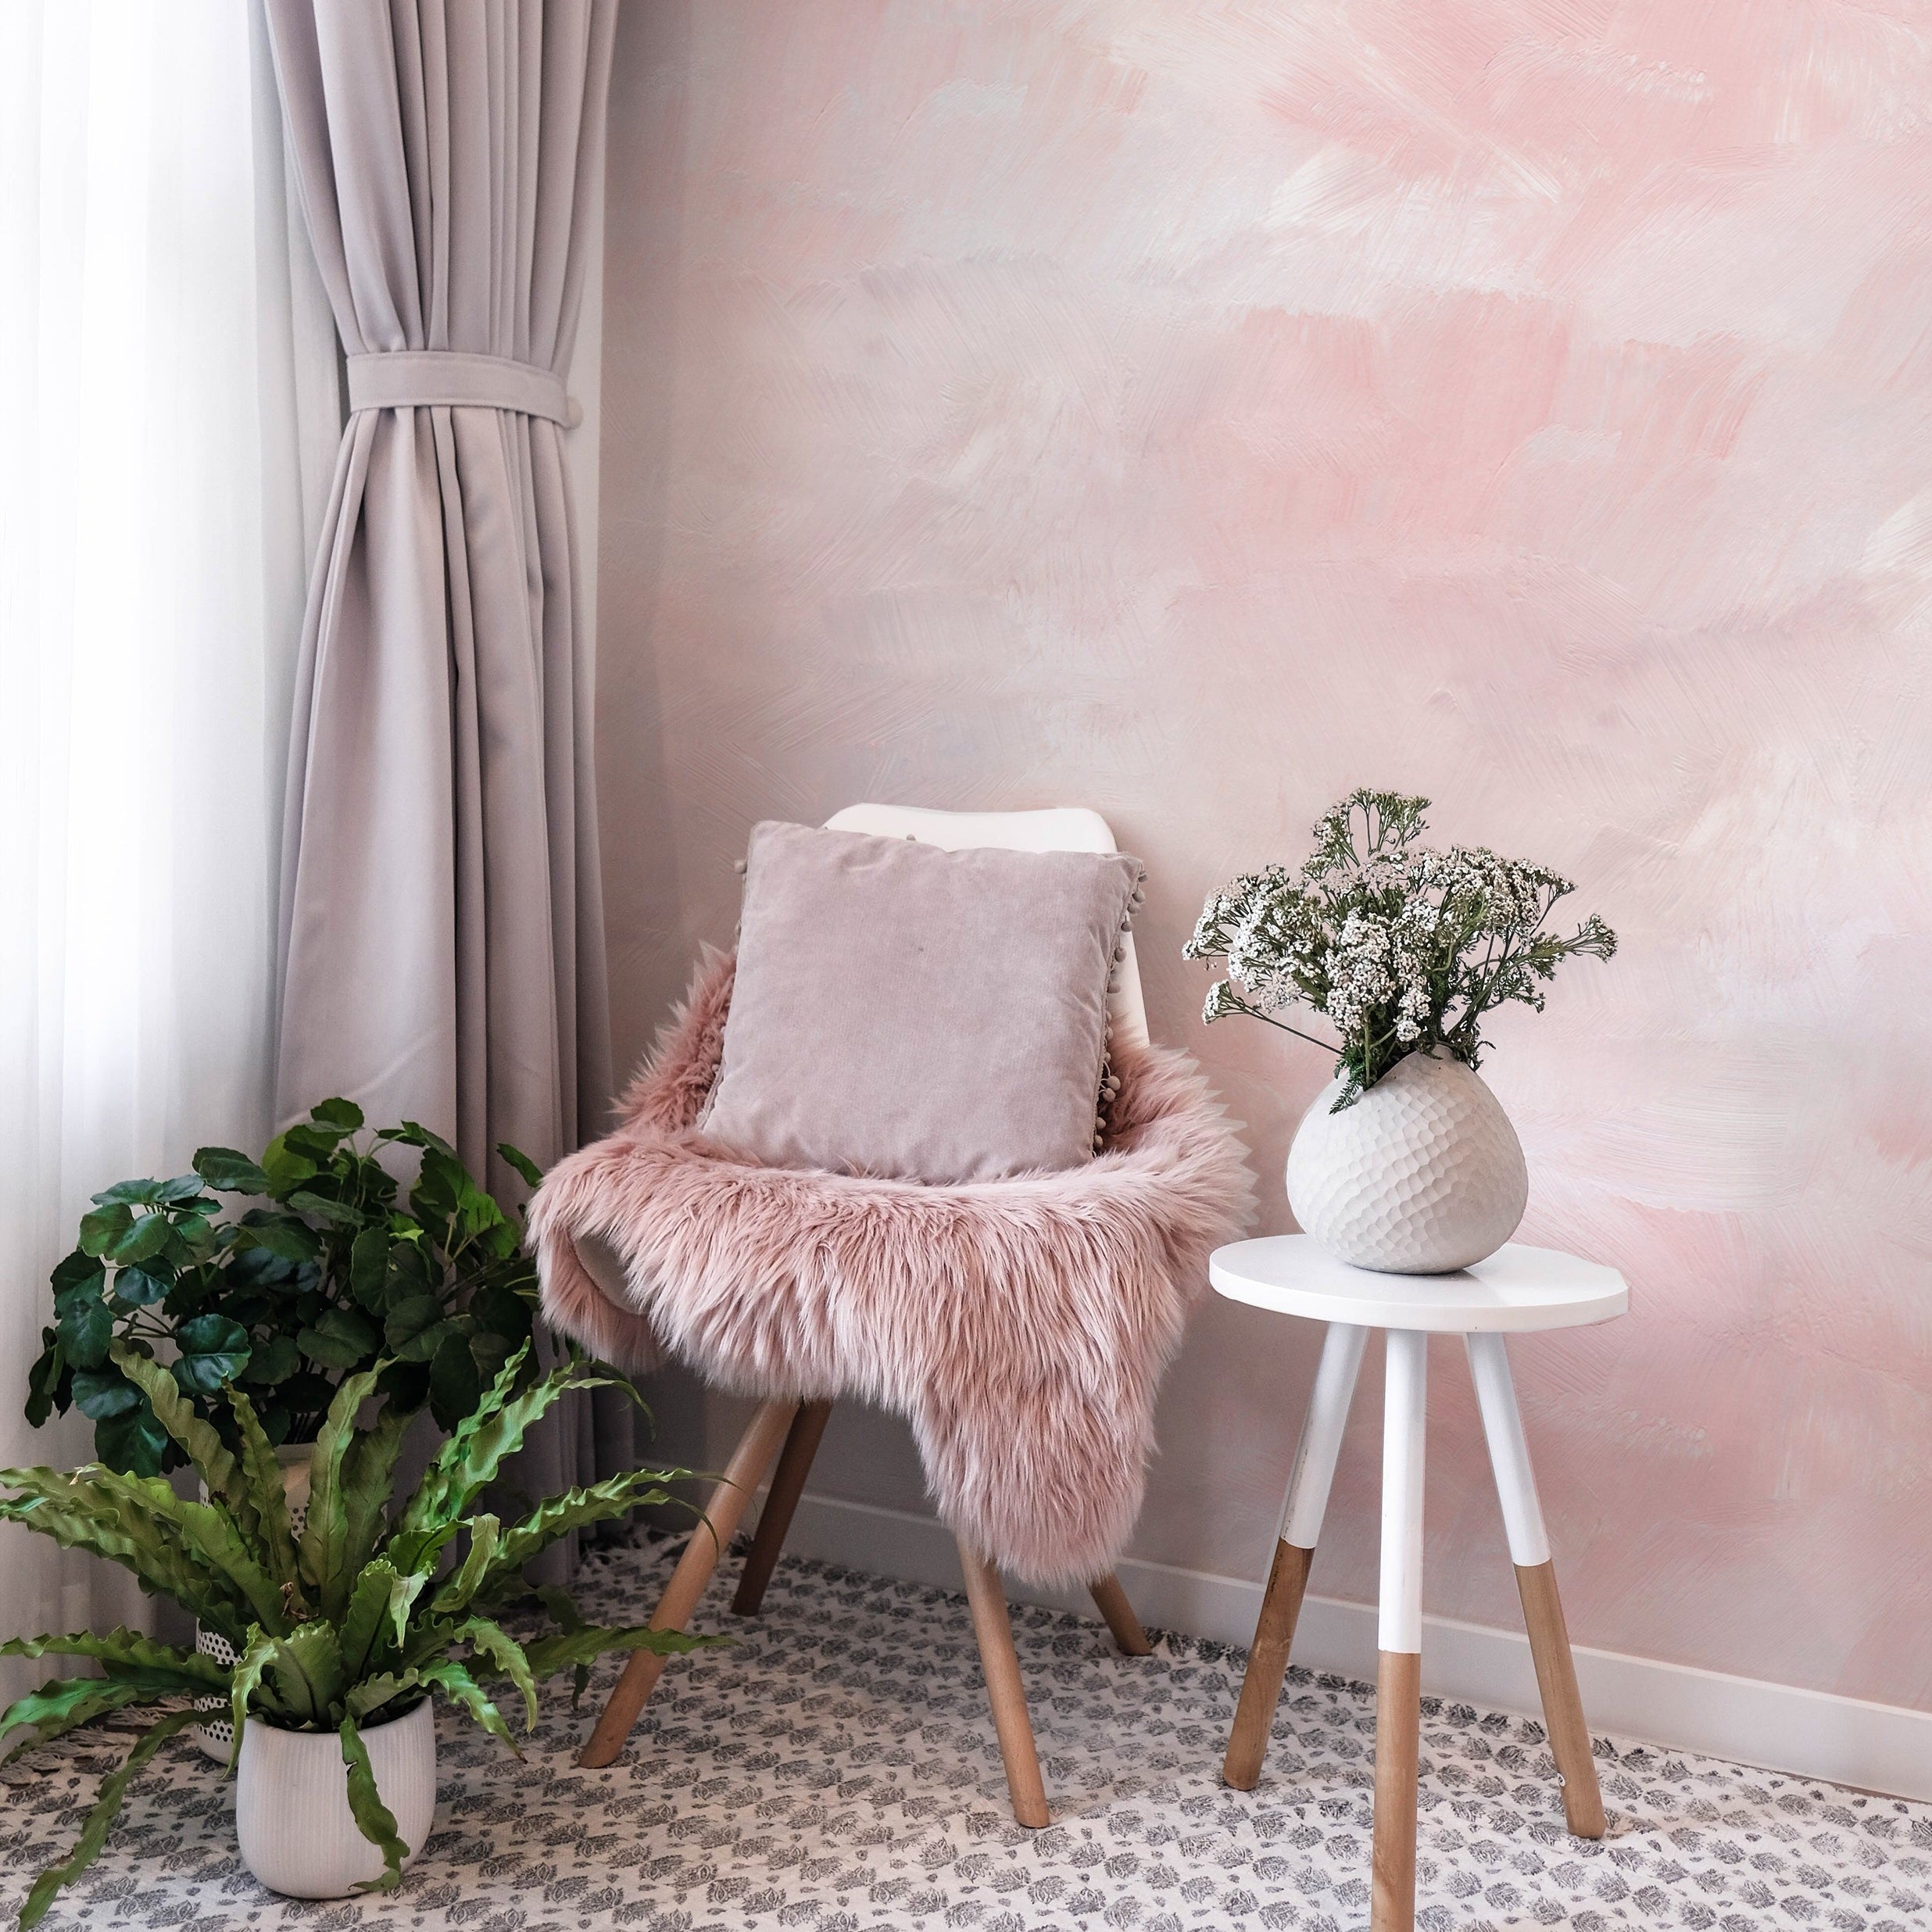 A cozy corner featuring the Venetian Watercolor Wallpaper. The space is styled with a plush chair with a furry throw, a white side table, and lush green plants, evoking a tranquil, modern vibe.